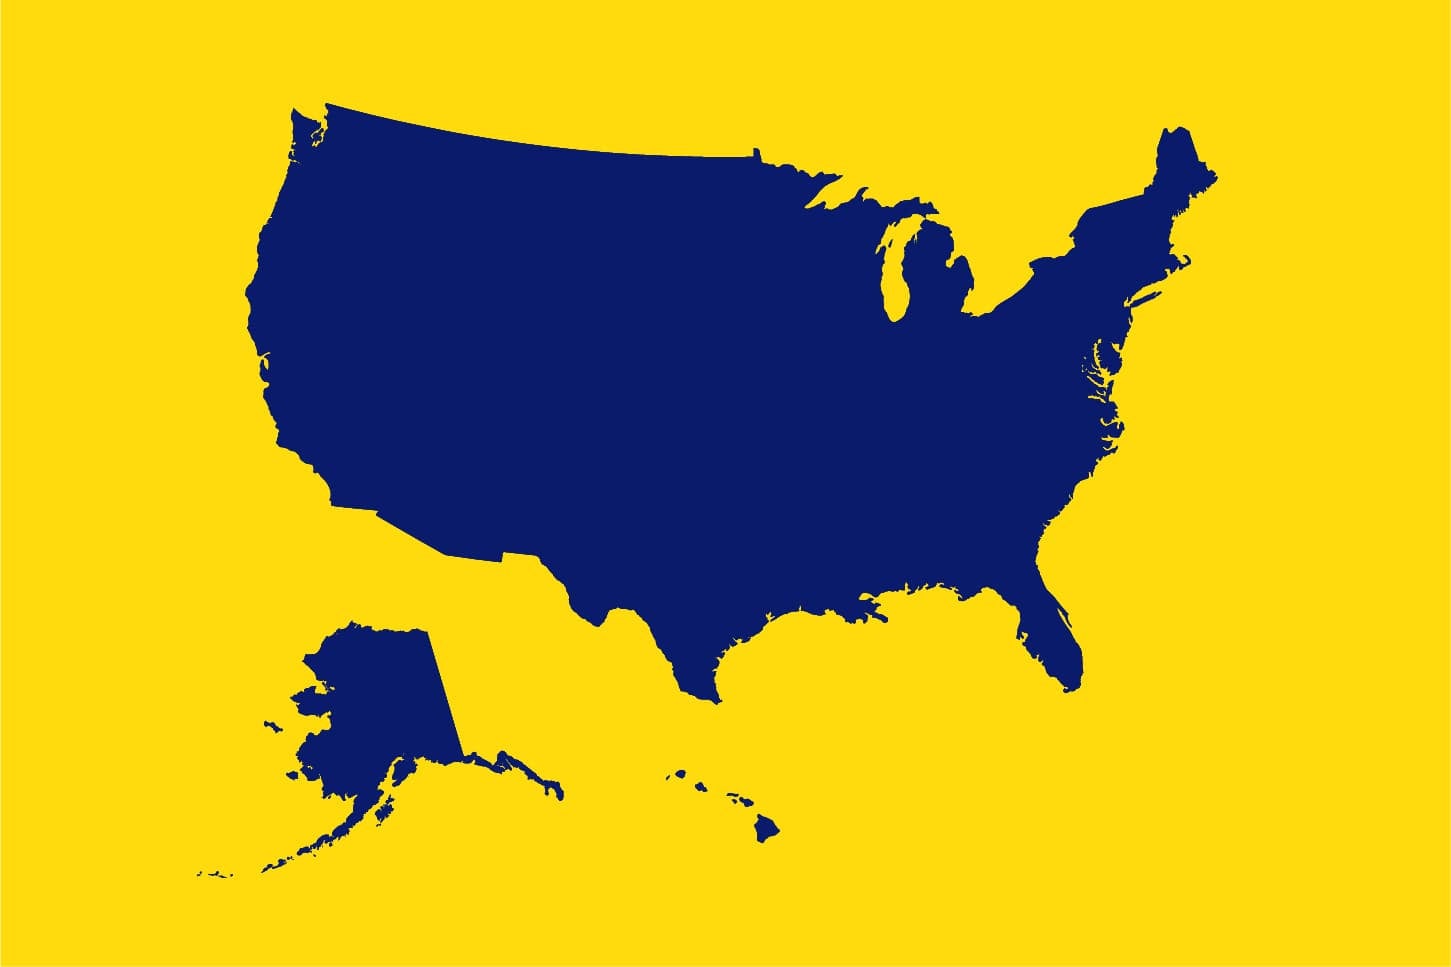 Outline of the United States